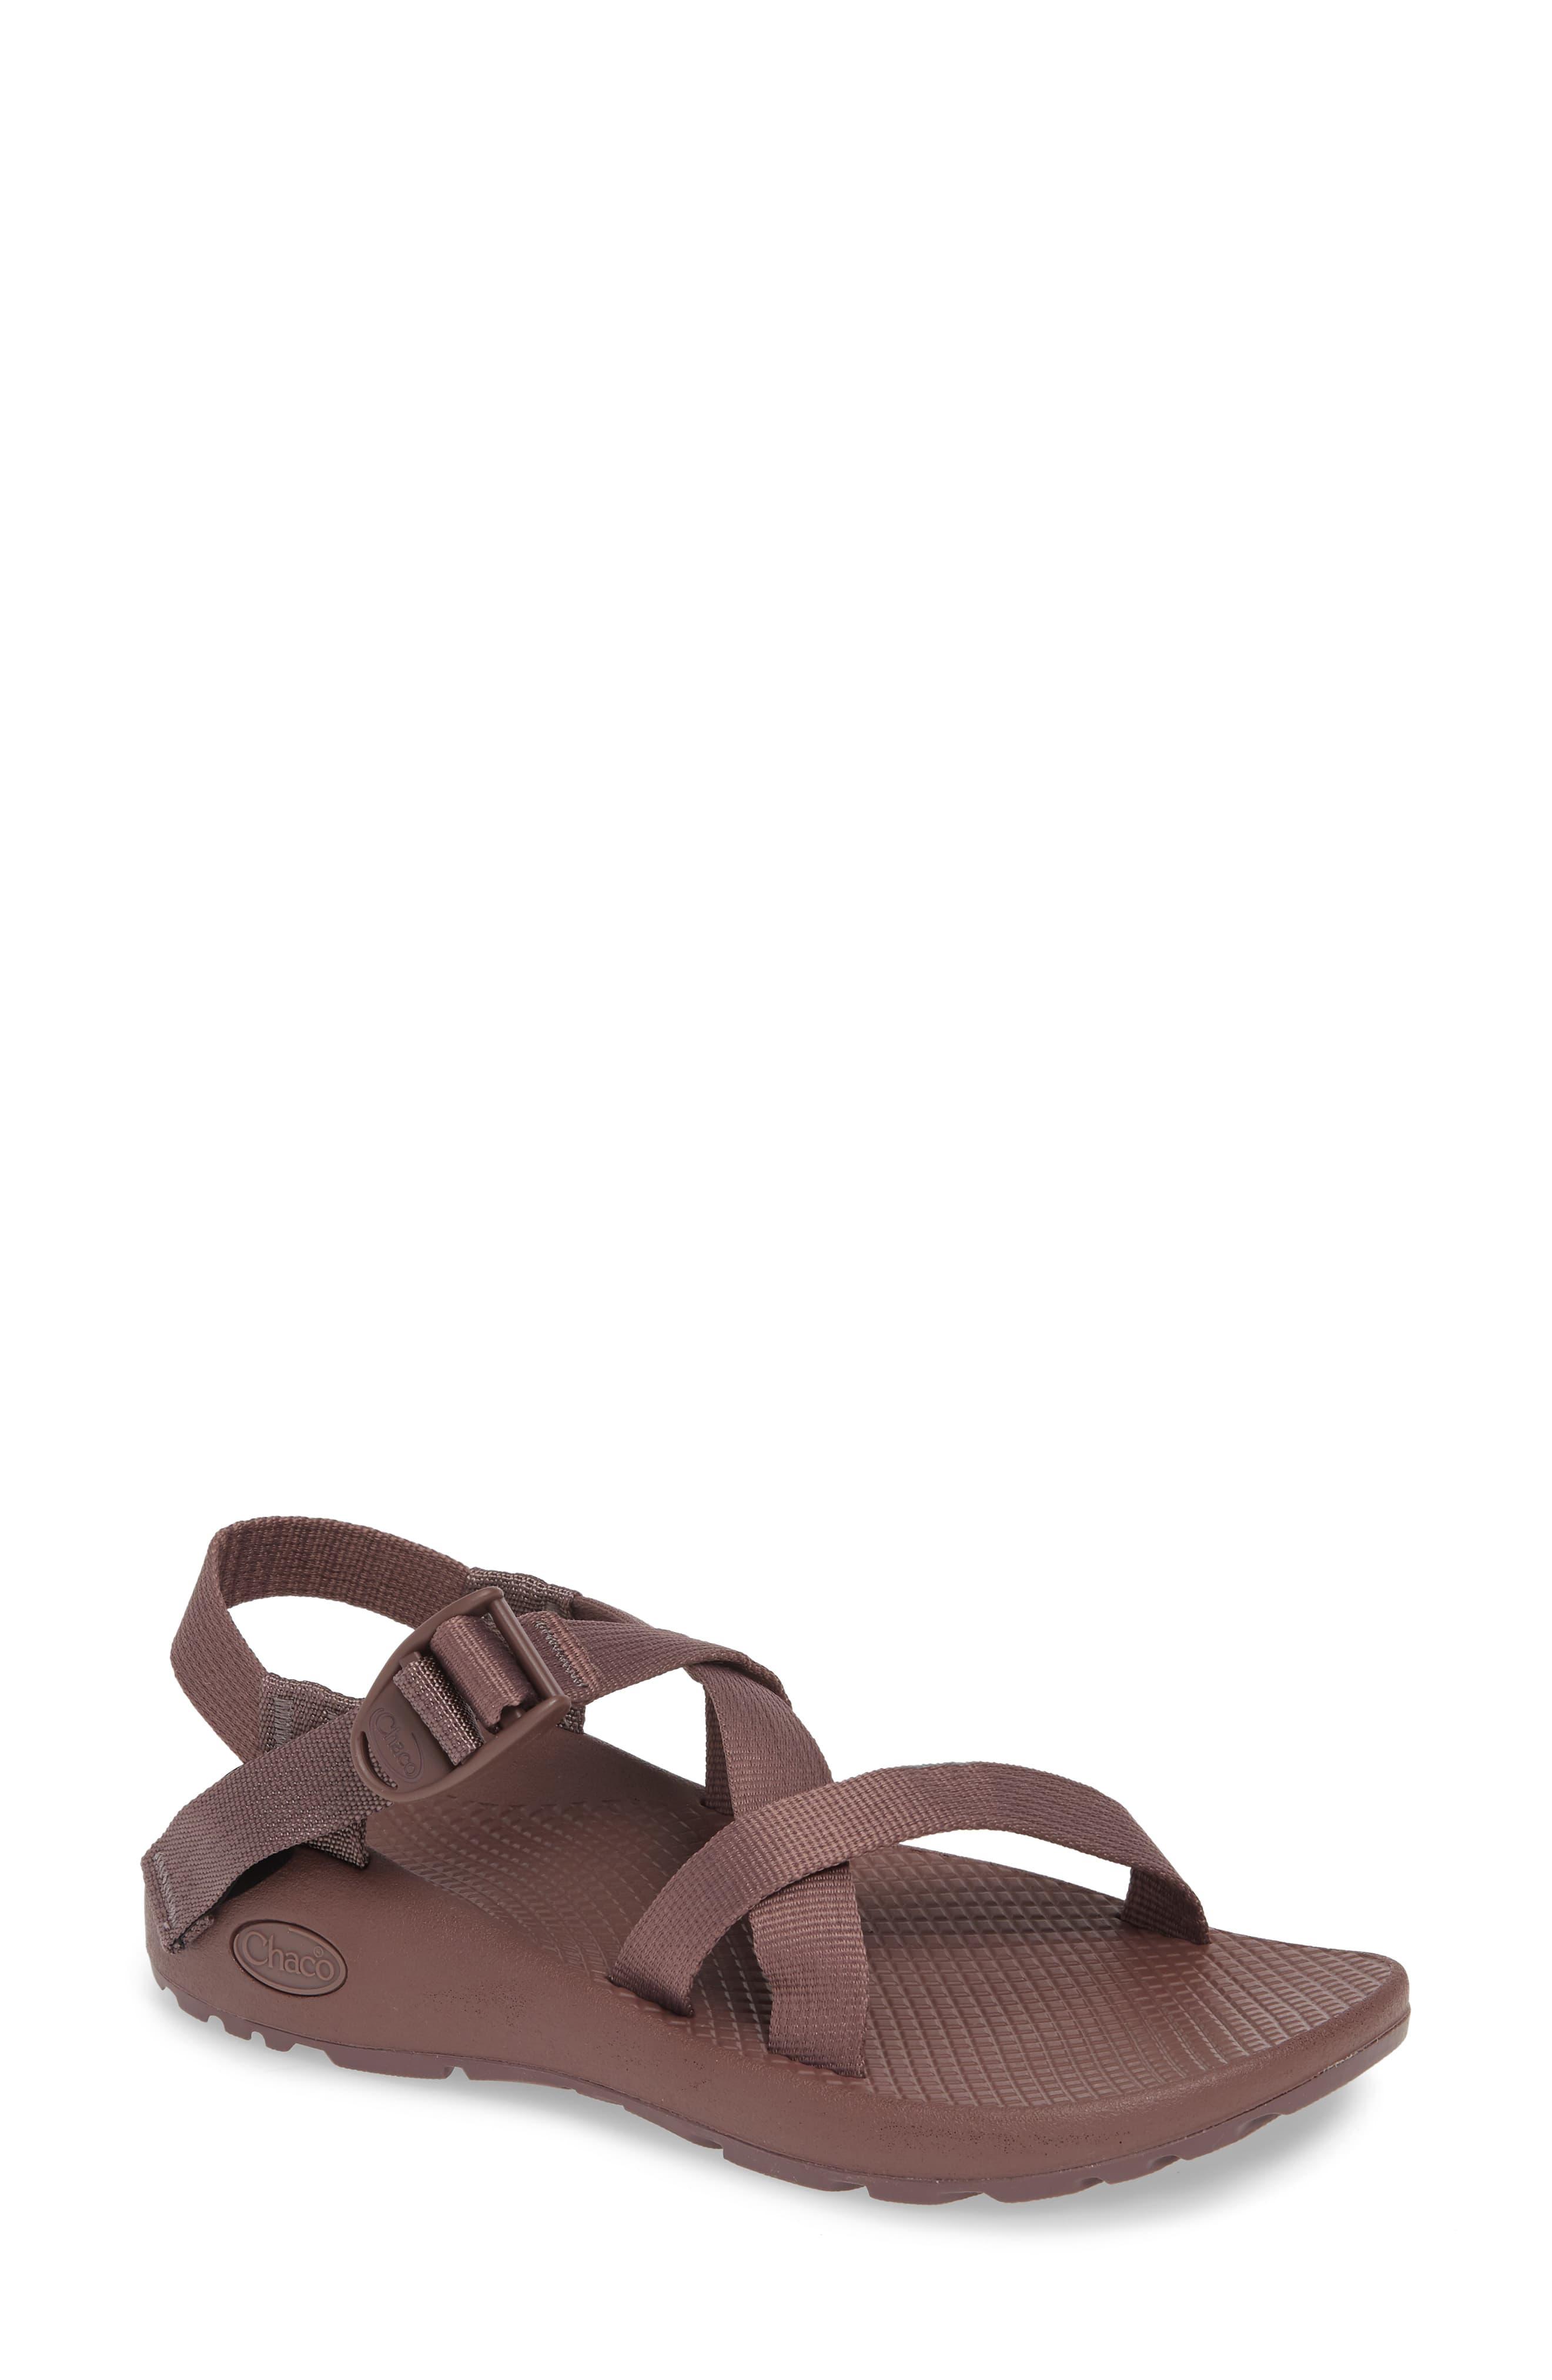 Chaco Synthetic Z1 Classic Monochrome Sandal in Brown - Lyst